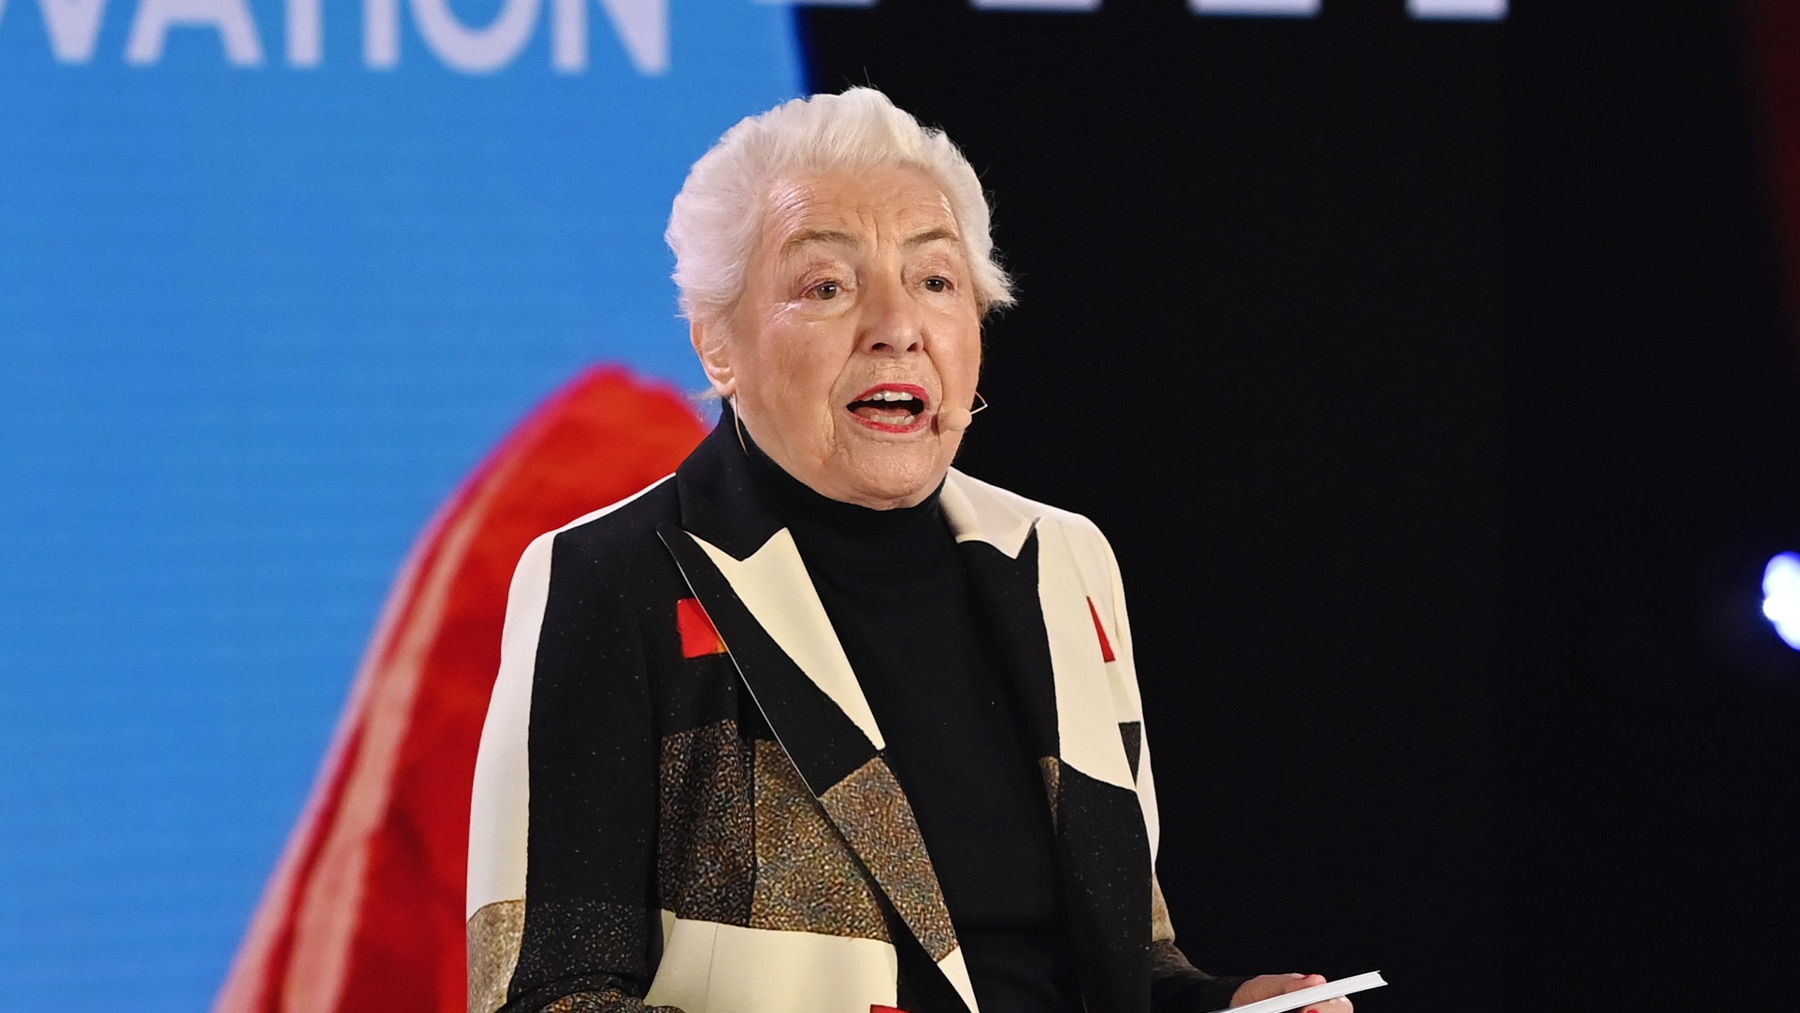 The BoF Podcast | Dame Stephanie Shirley: “Men Told Me There Was No Market For Software Houses. We Proved Them Wrong.”